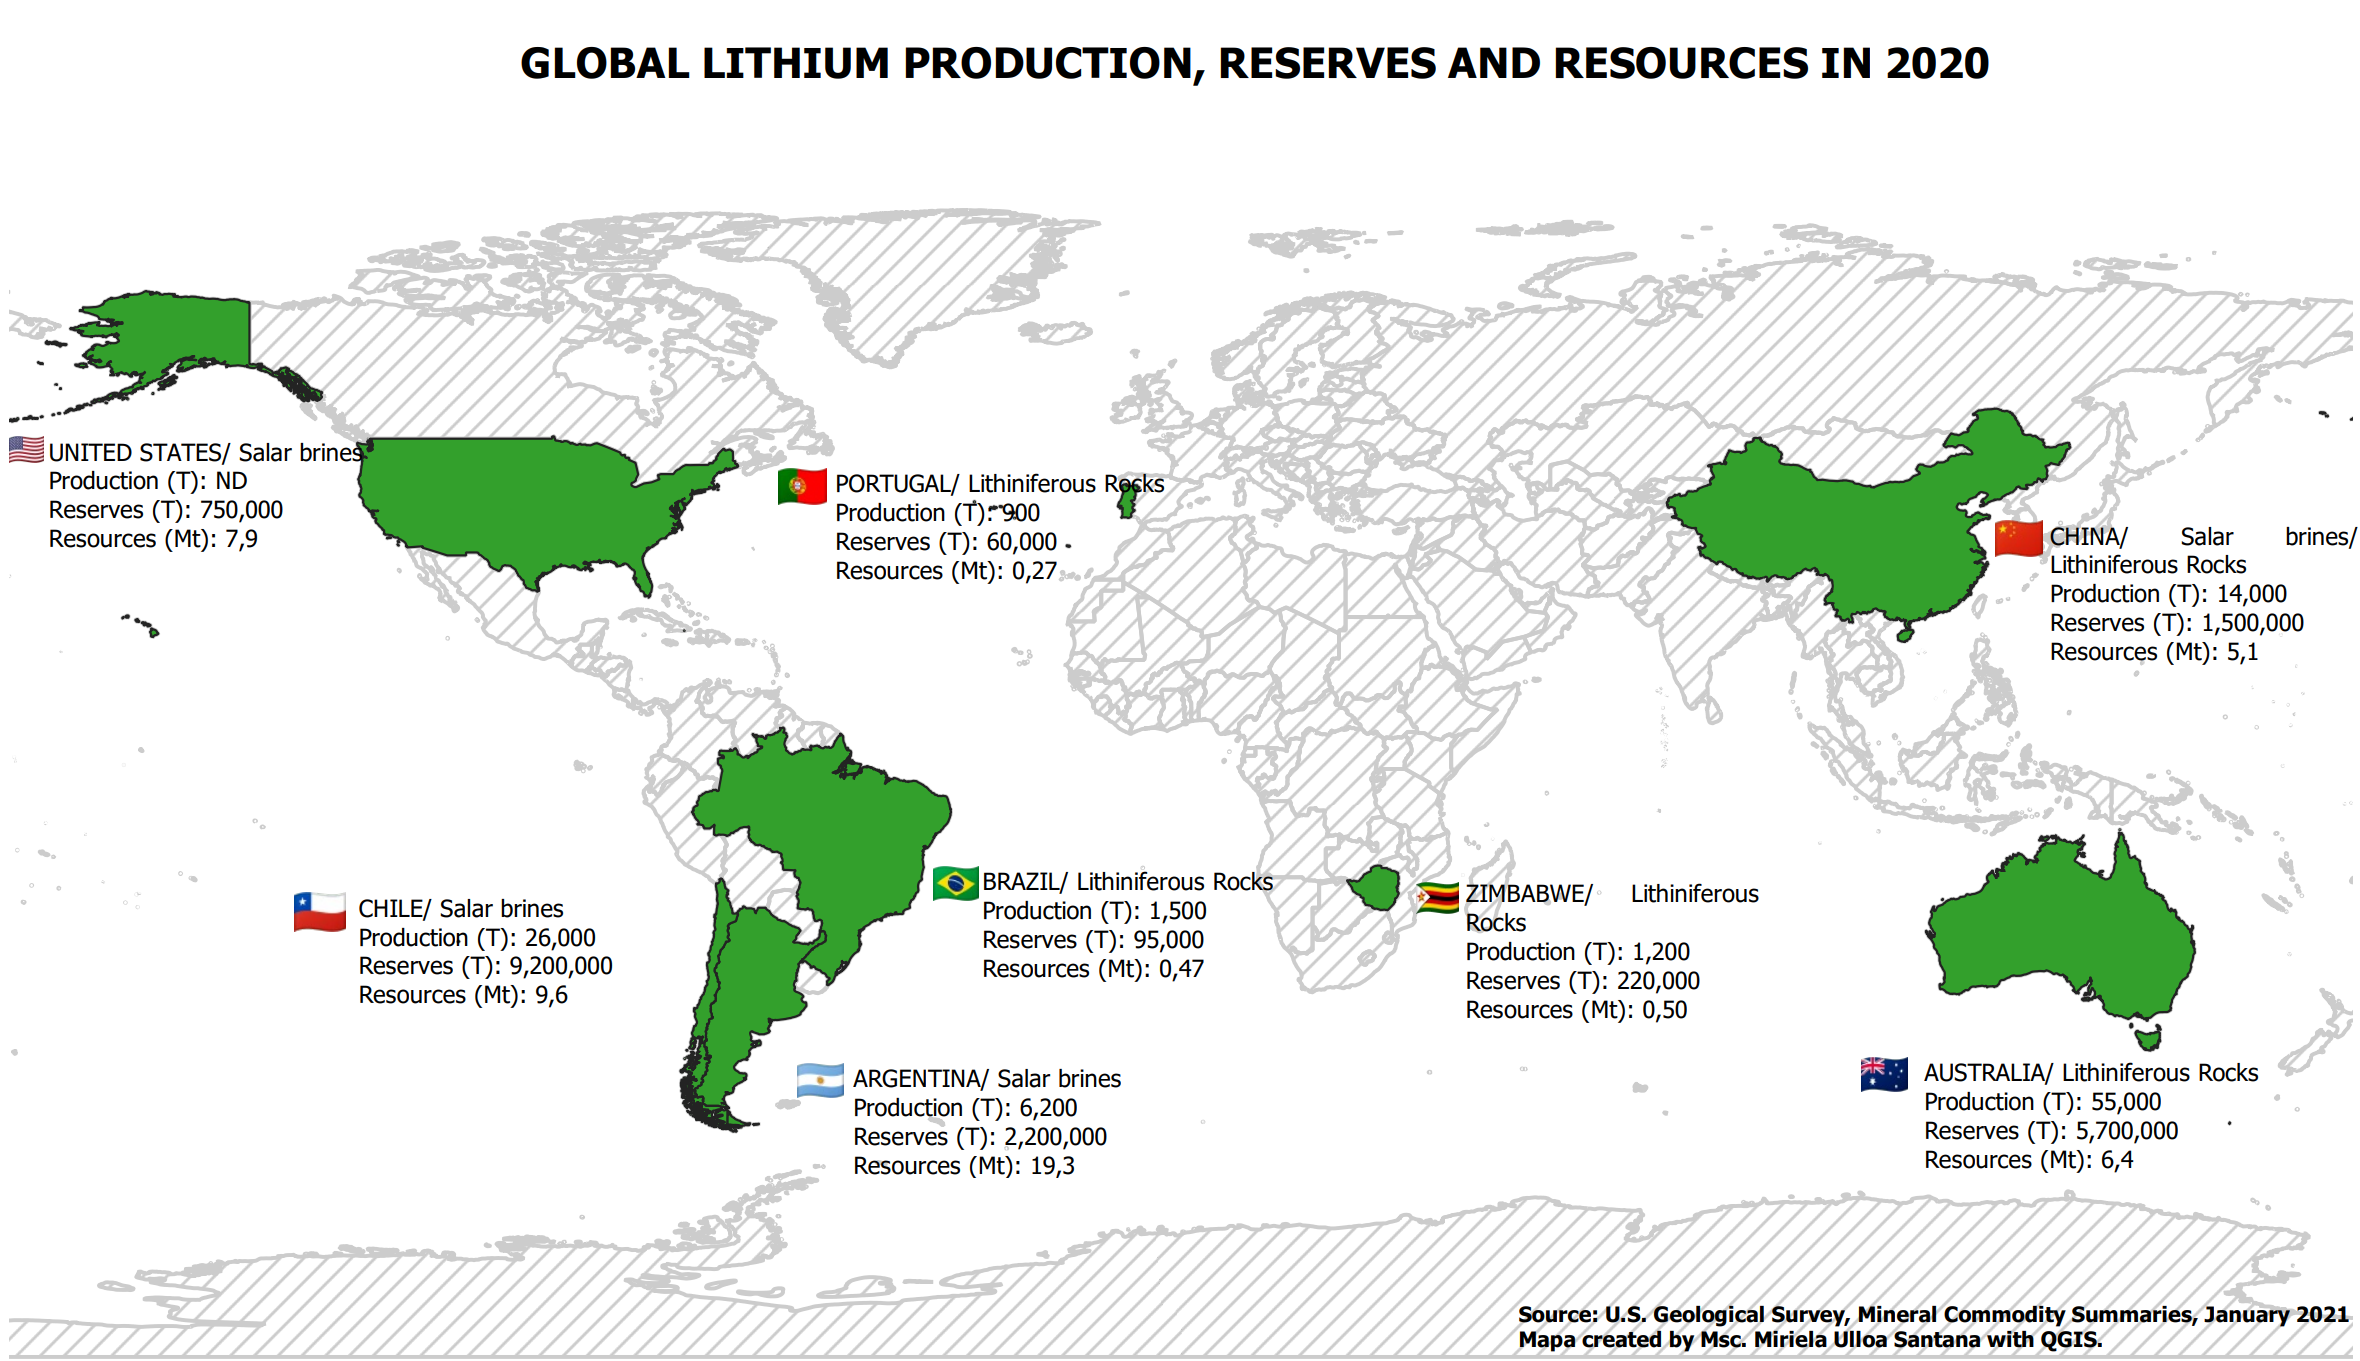 GLOBAL LITHIUM PRODUCTION IN 2020